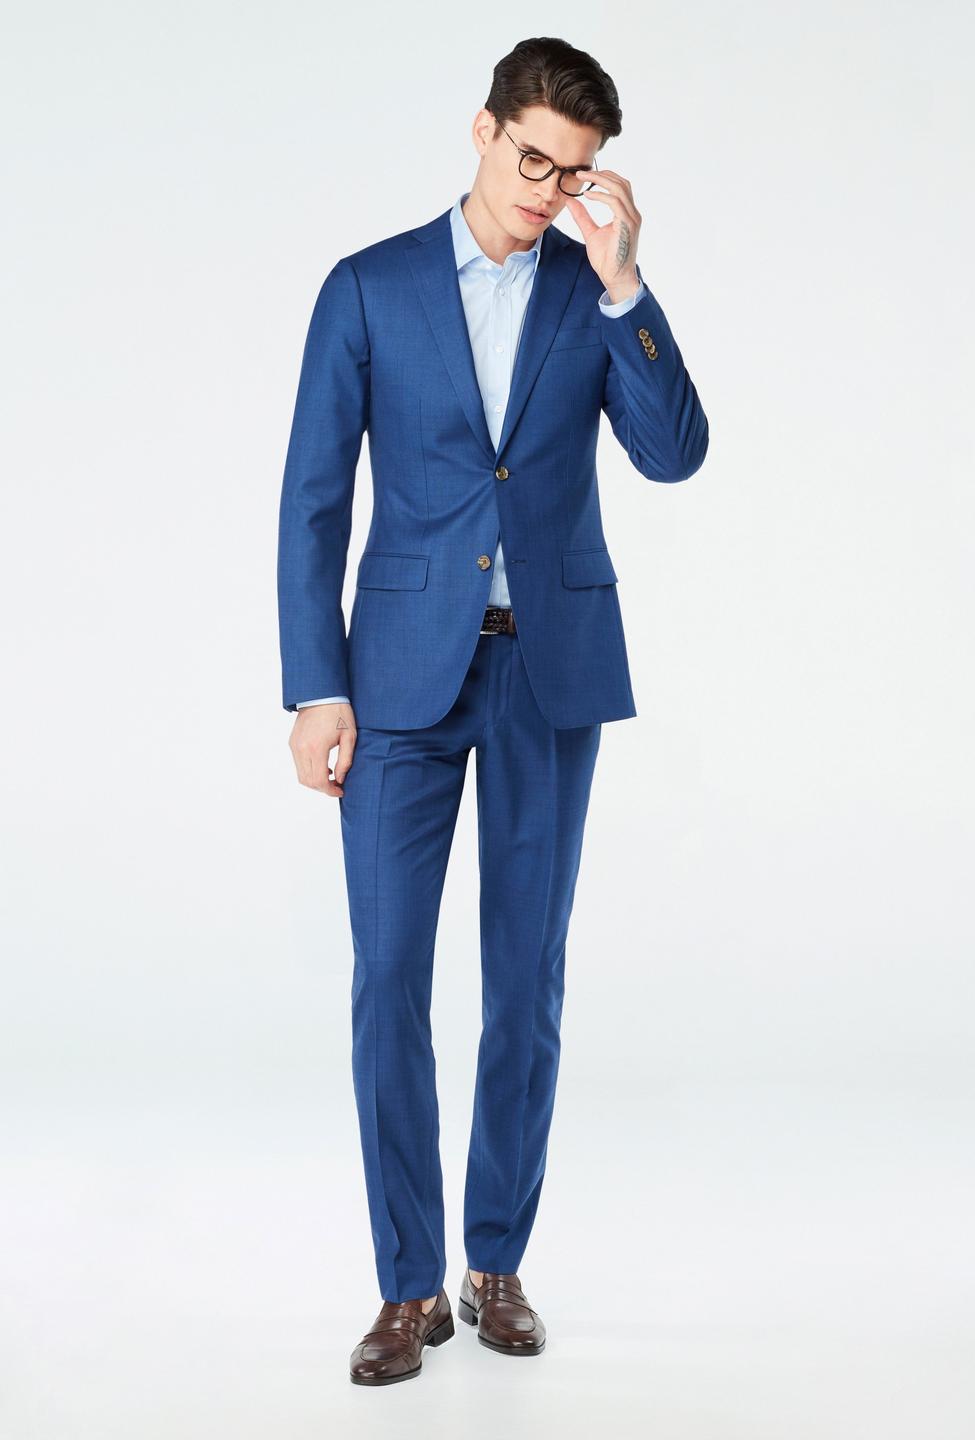 Blue suit - Hayle Solid Design from Premium Indochino Collection